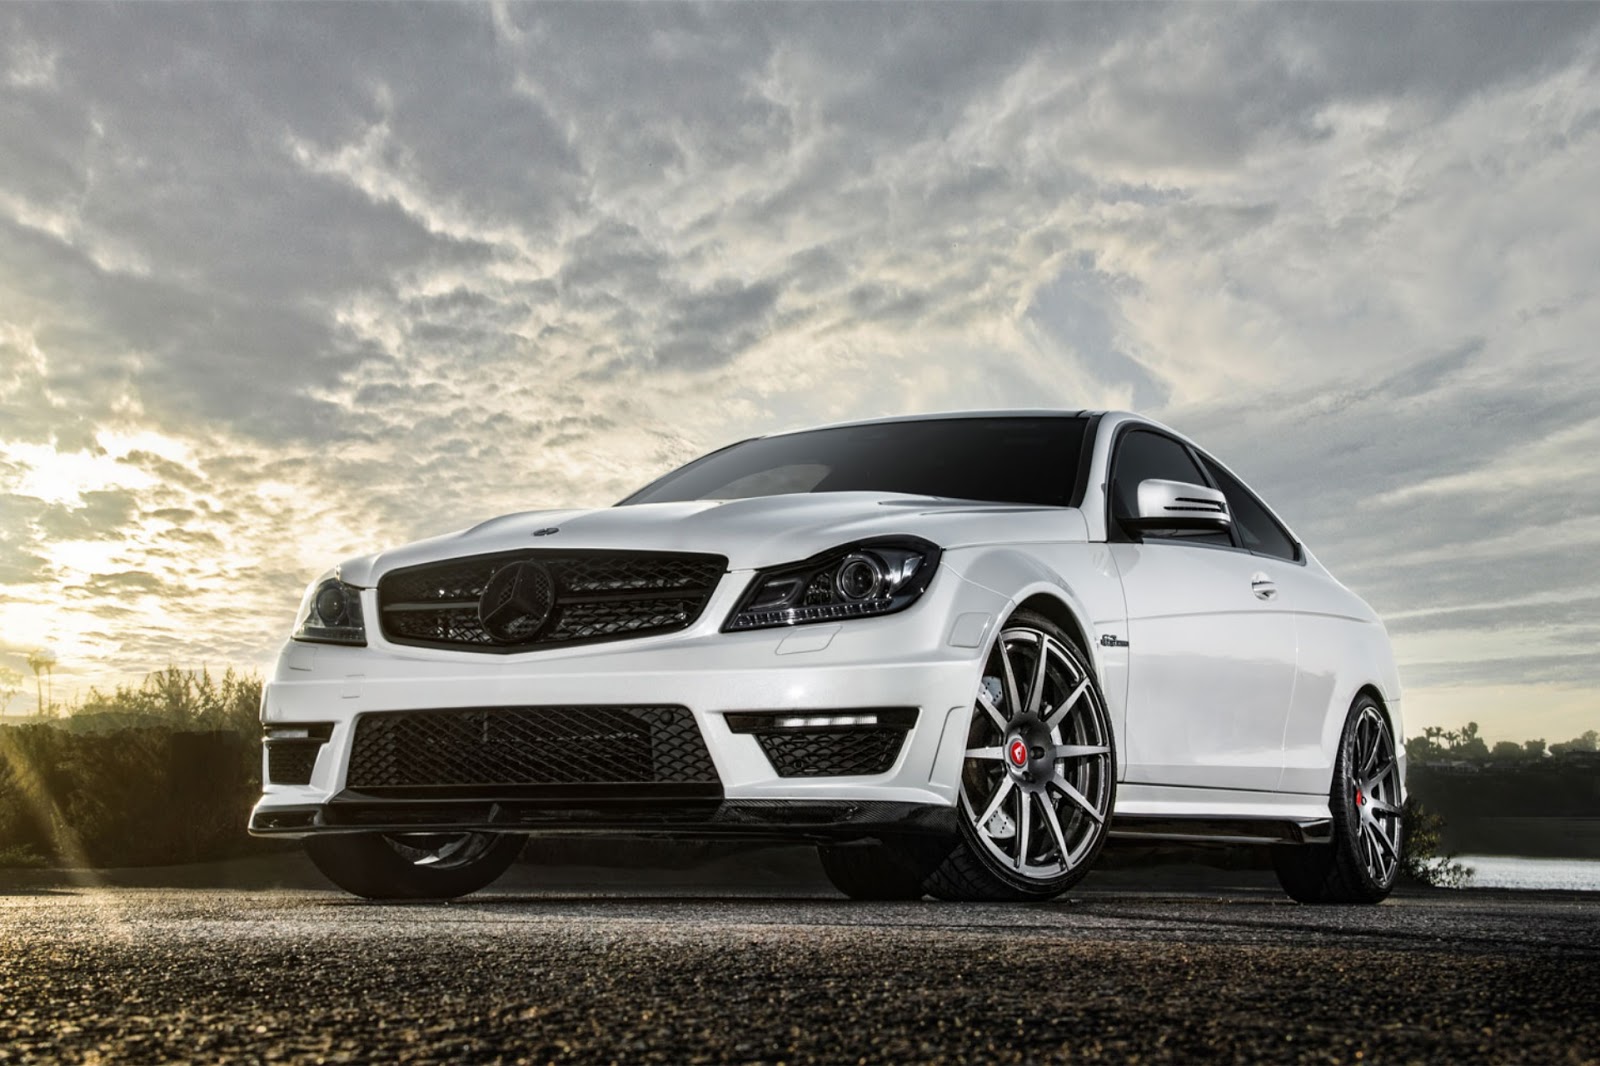 C63 HD Wallpaper Mercedes Benz Check Out The Cool